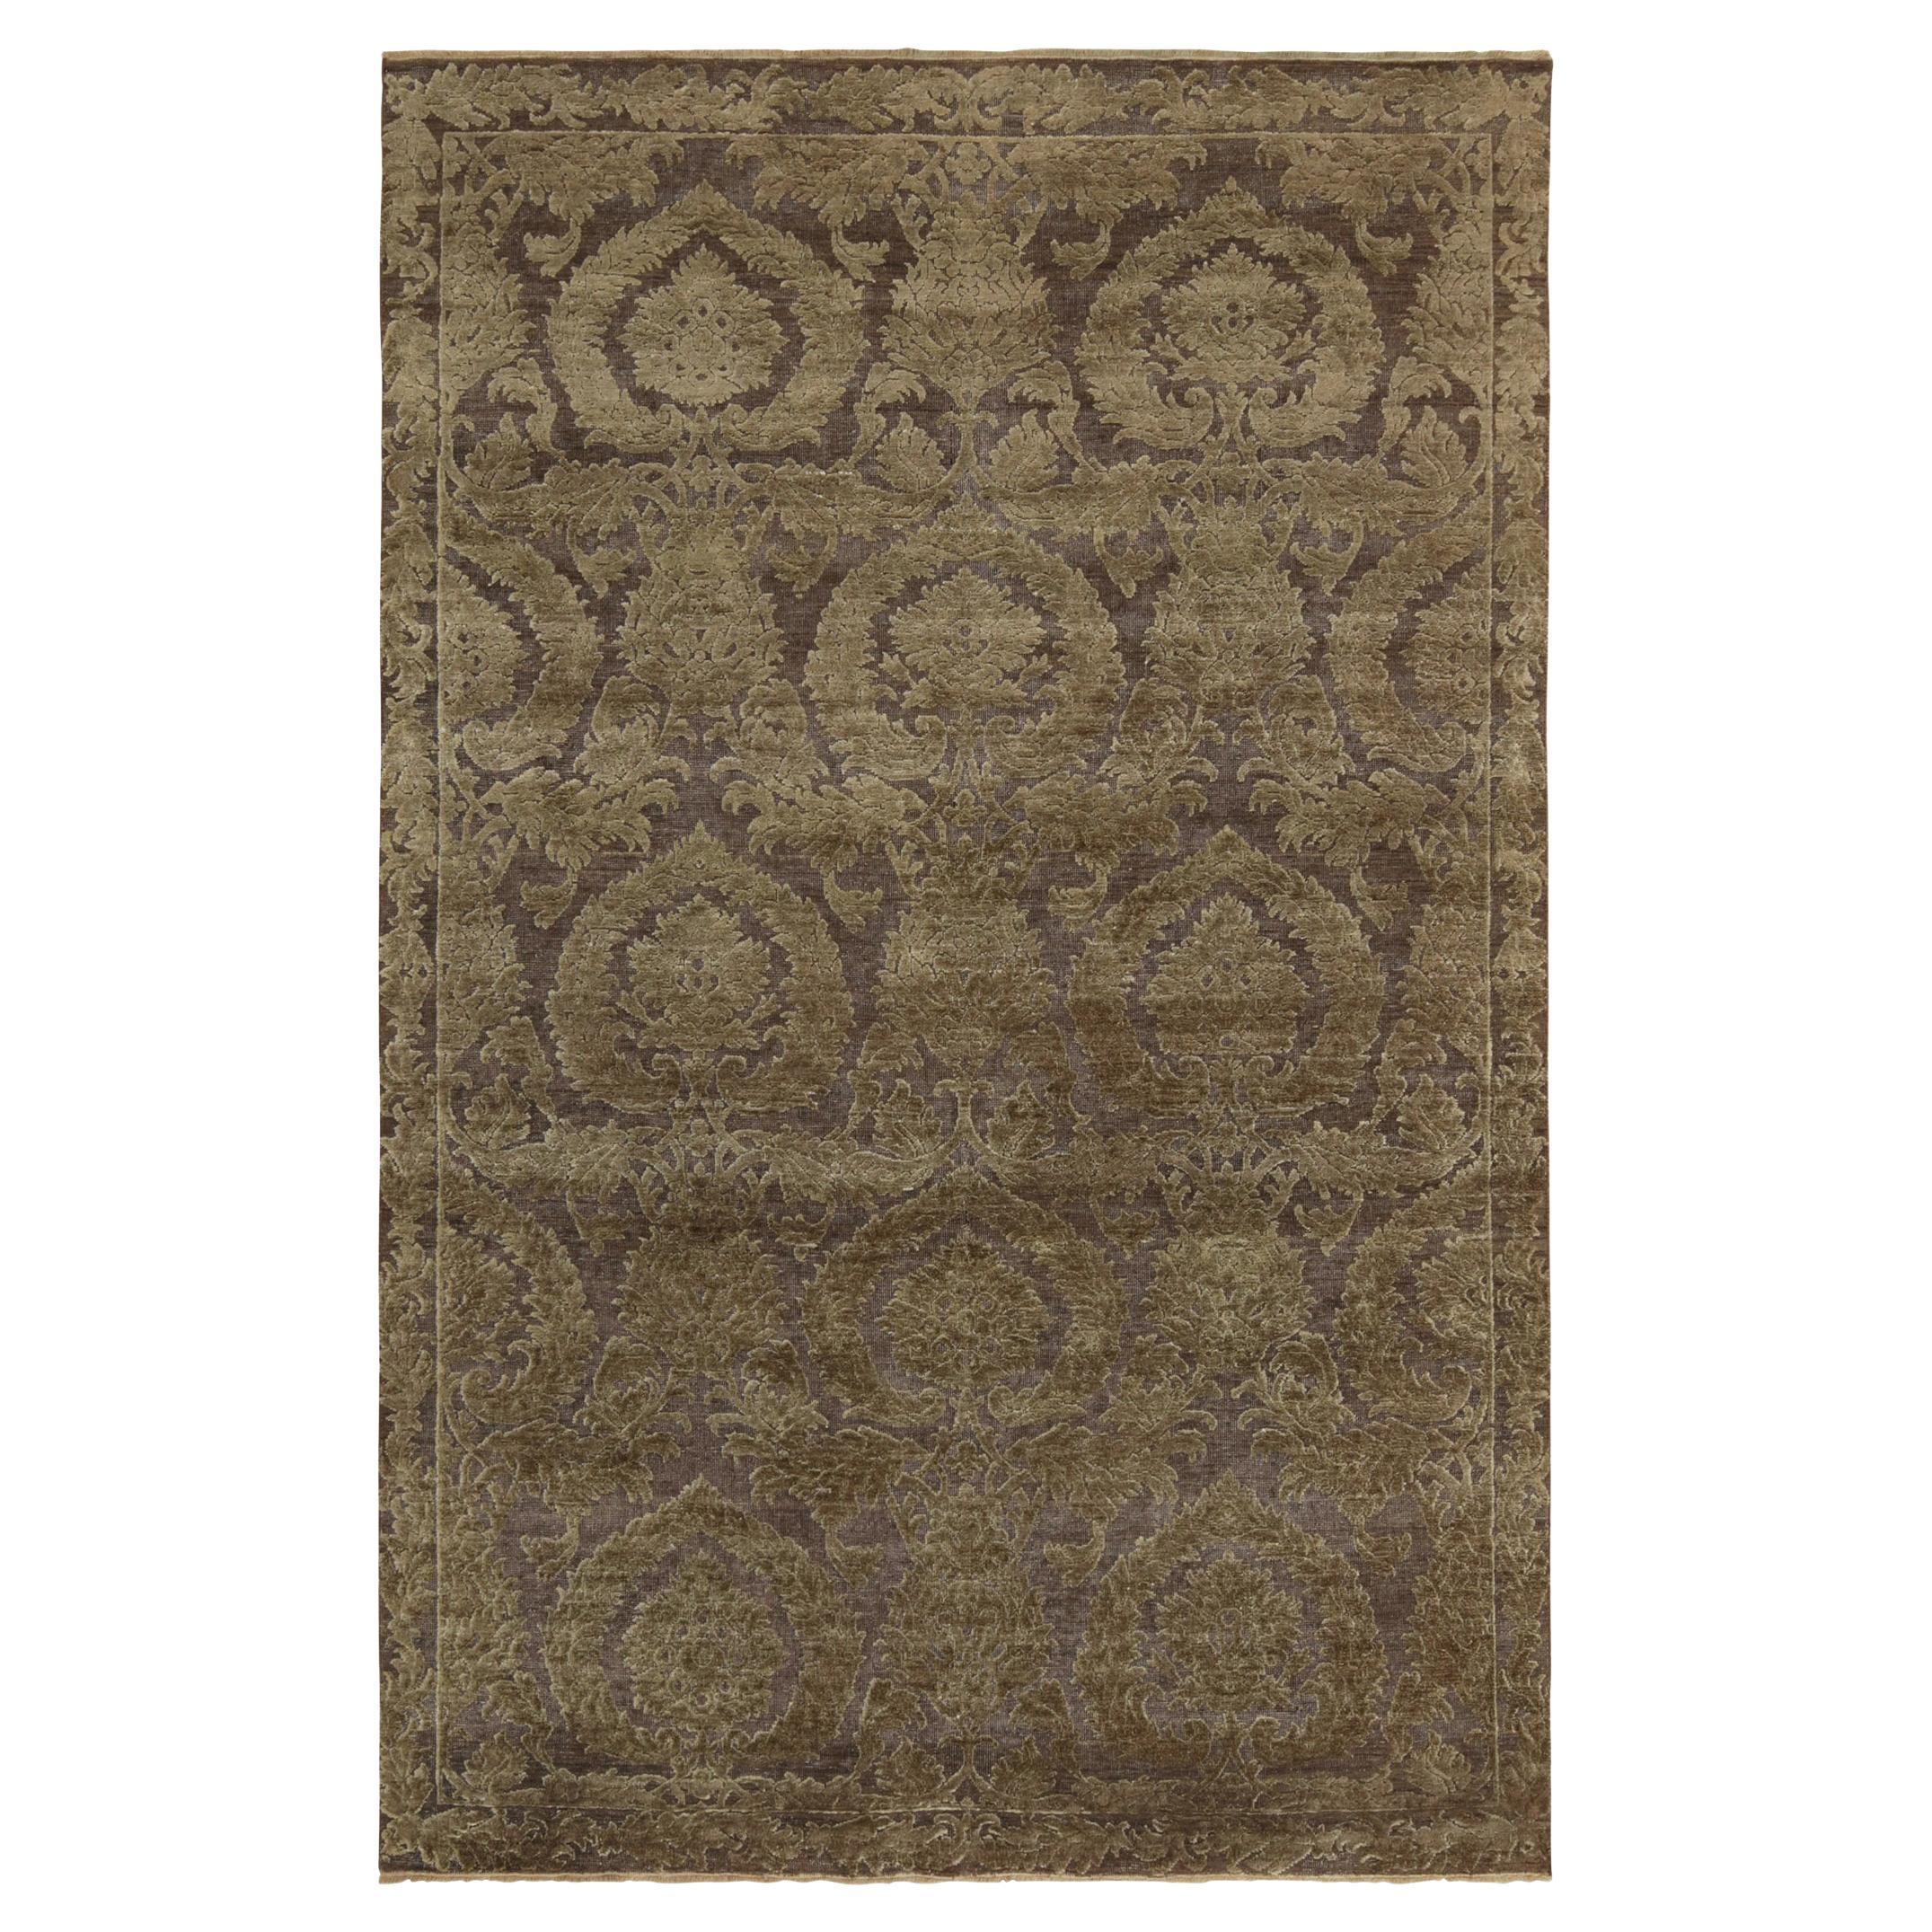 Rug & Kilim’s Classic Italian Style Rug in Beige-Brown Floral Patterns For Sale